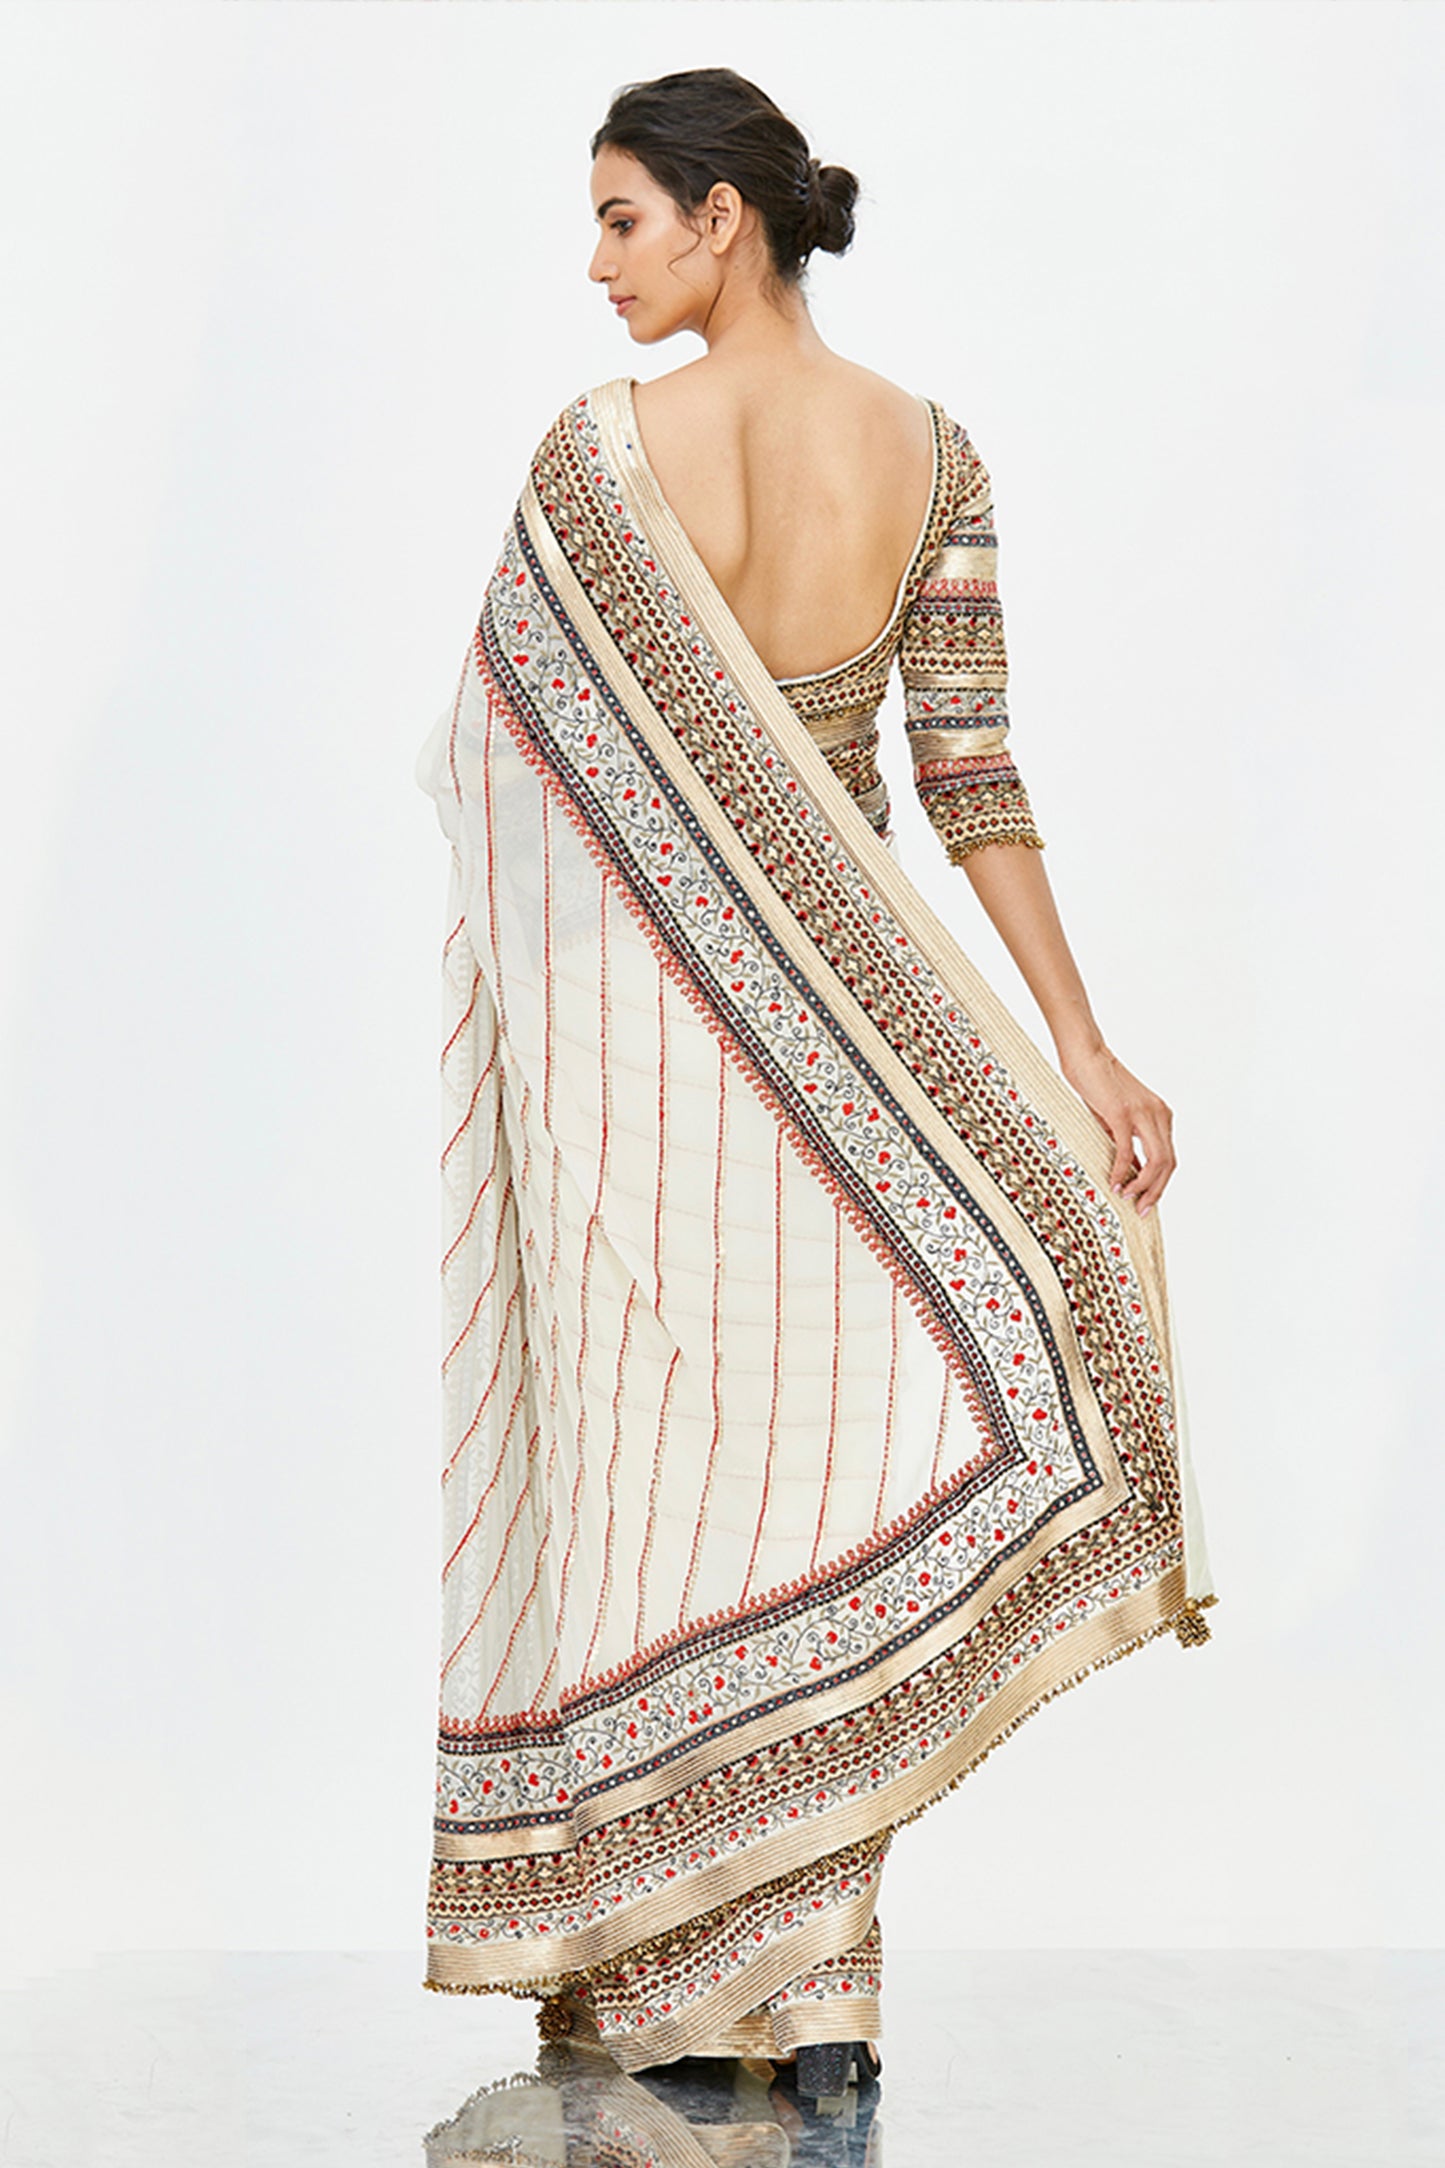 Sari Set in Tribal Thread Embroidery with Gold Sequins